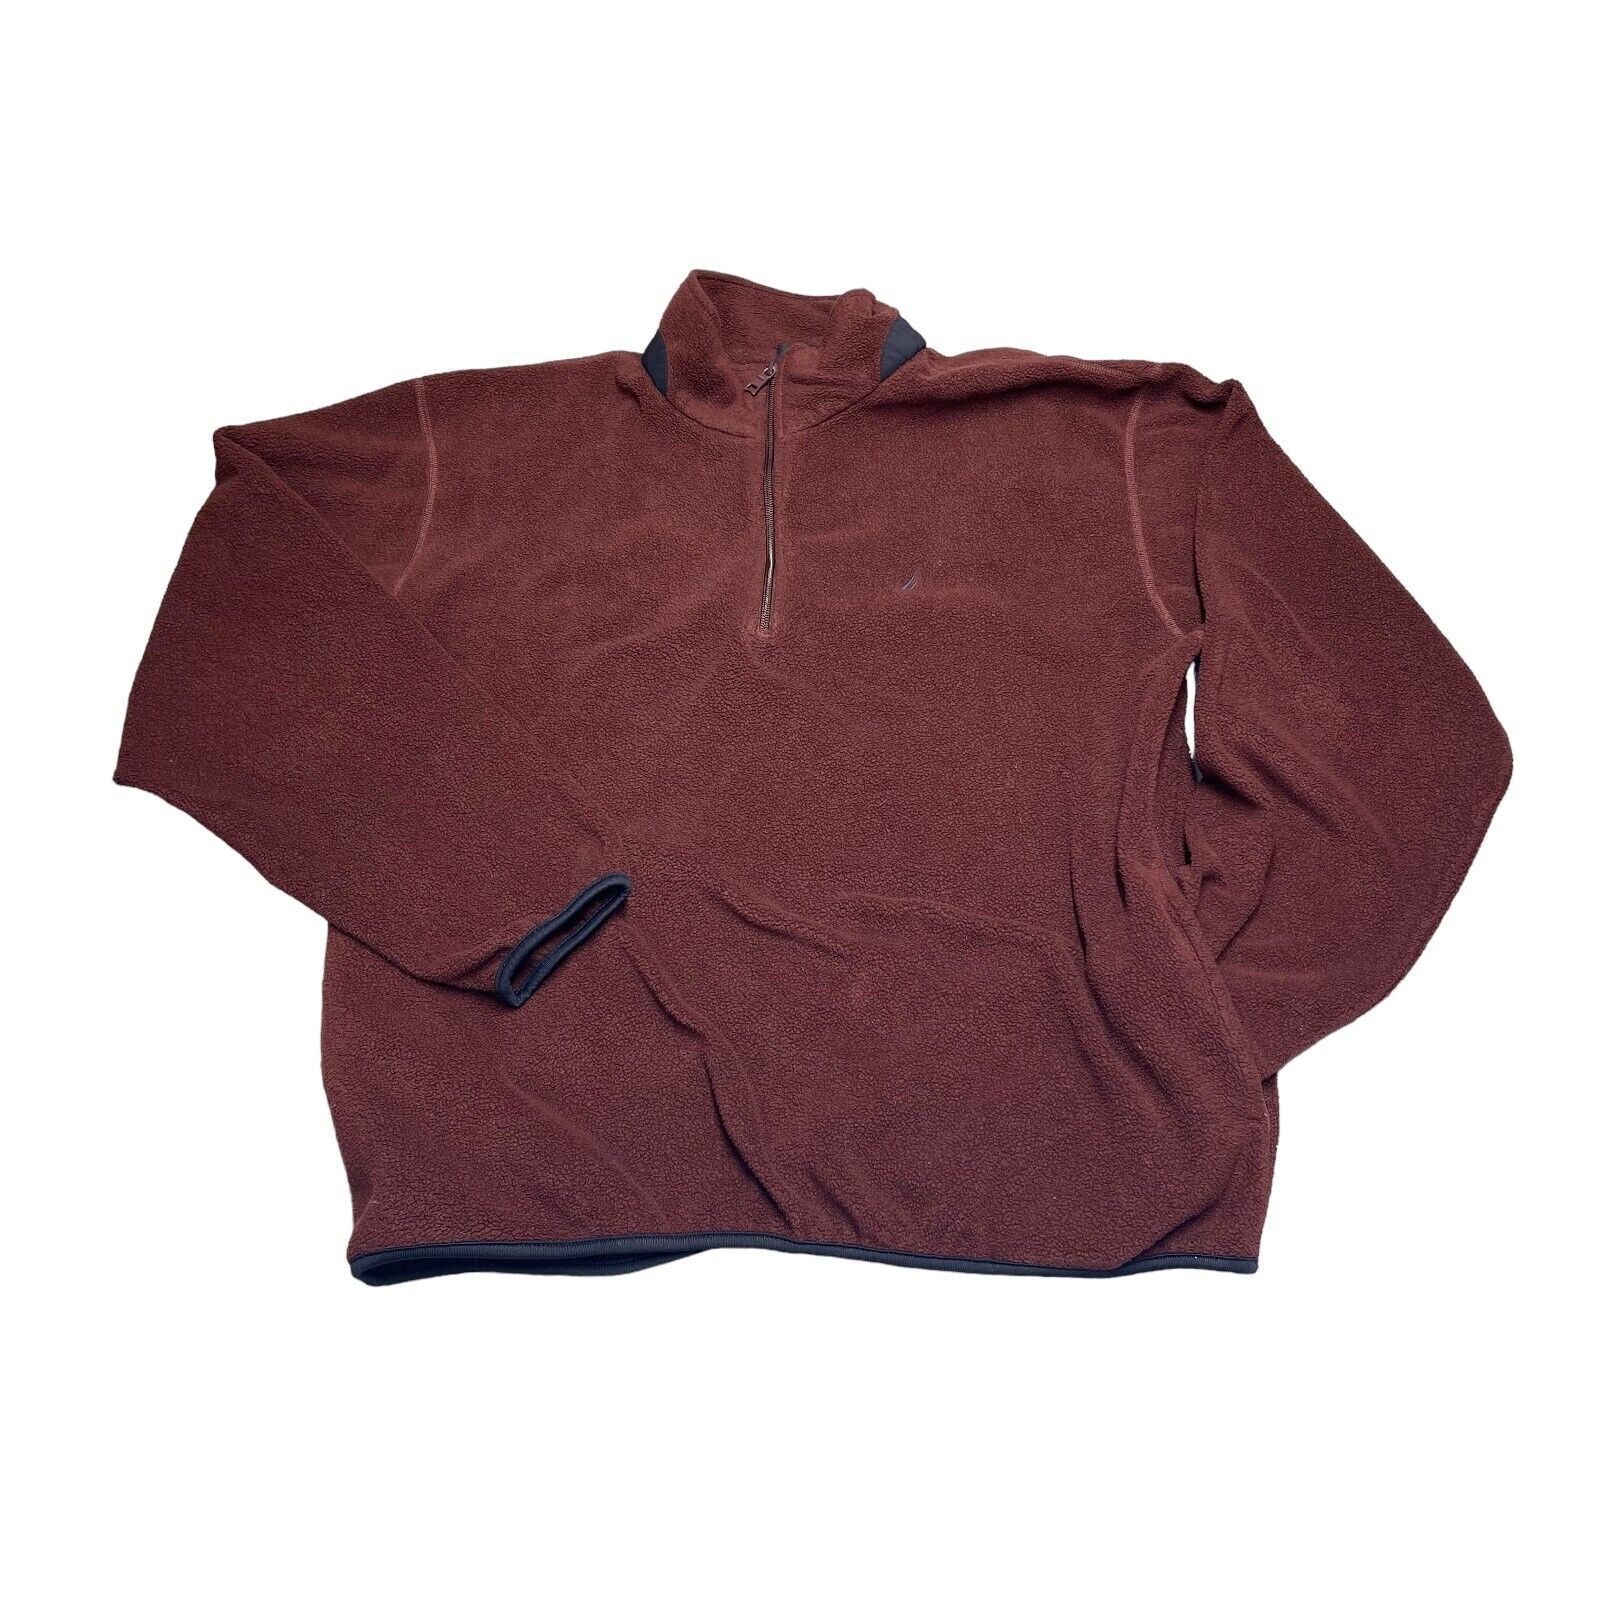 Primary image for Nautica Sweater Fleece Mens XL Red Burgundy Long Sleeve 1/4 Zip Pullover